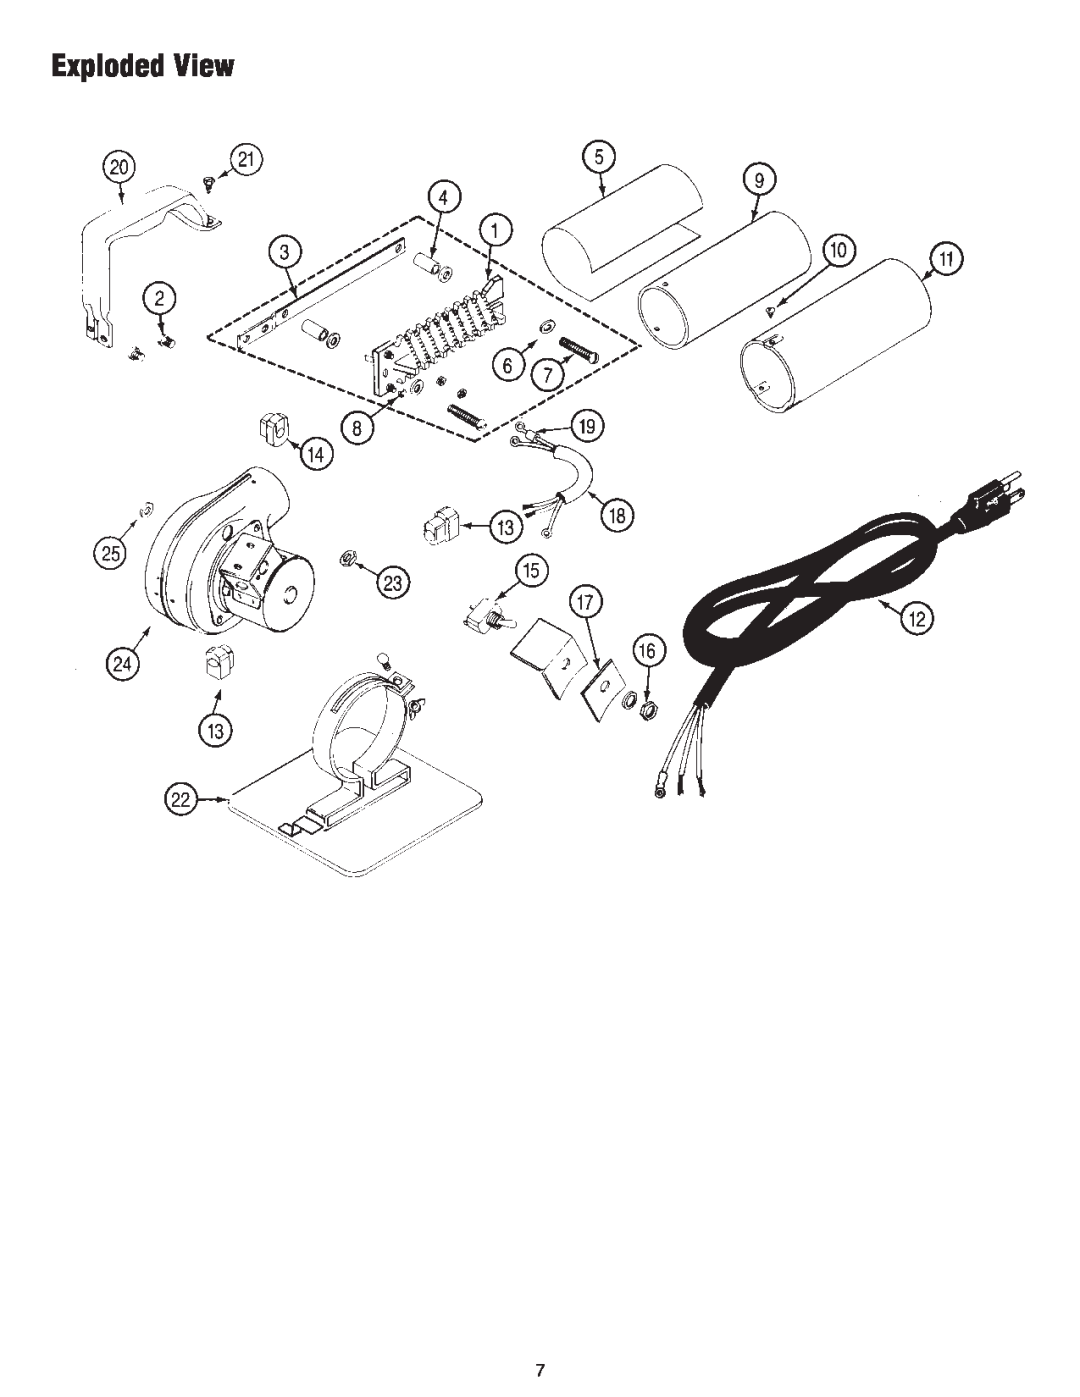 Master Appliance Heat Blower instruction manual Exploded View 